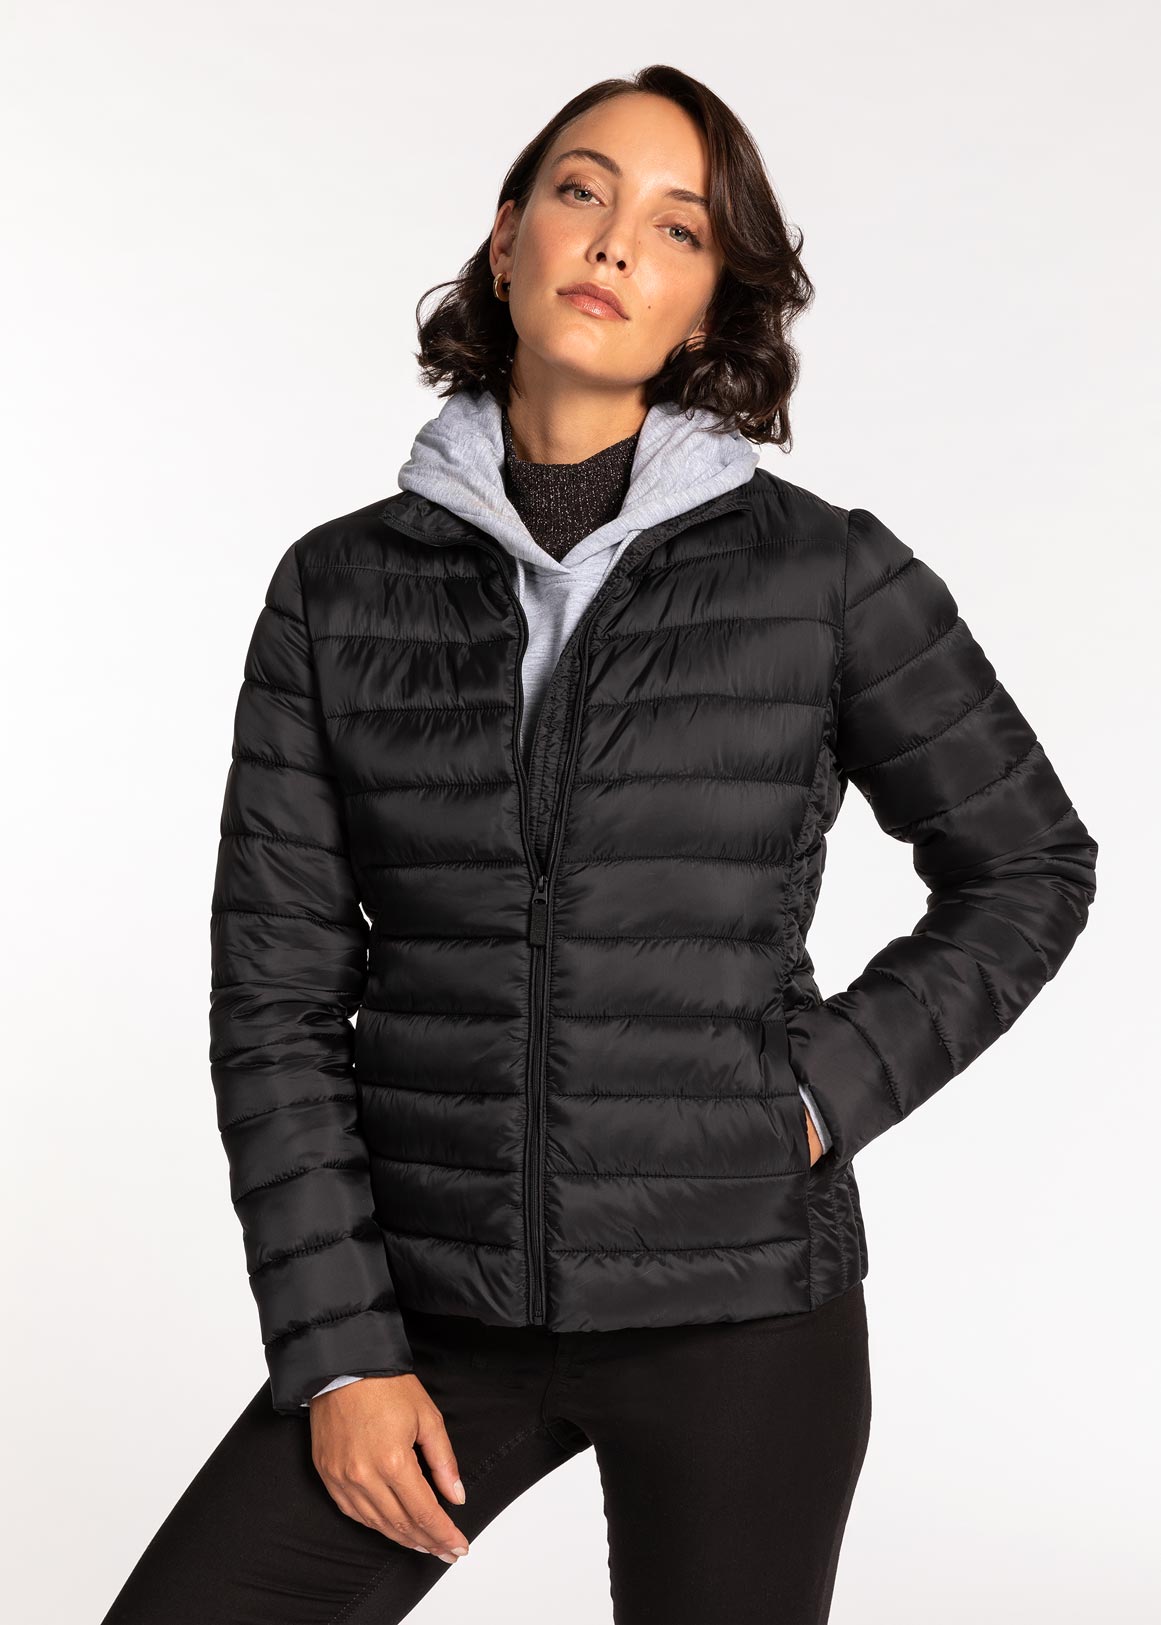 Woolworths Winter Clothes For Ladies | vlr.eng.br